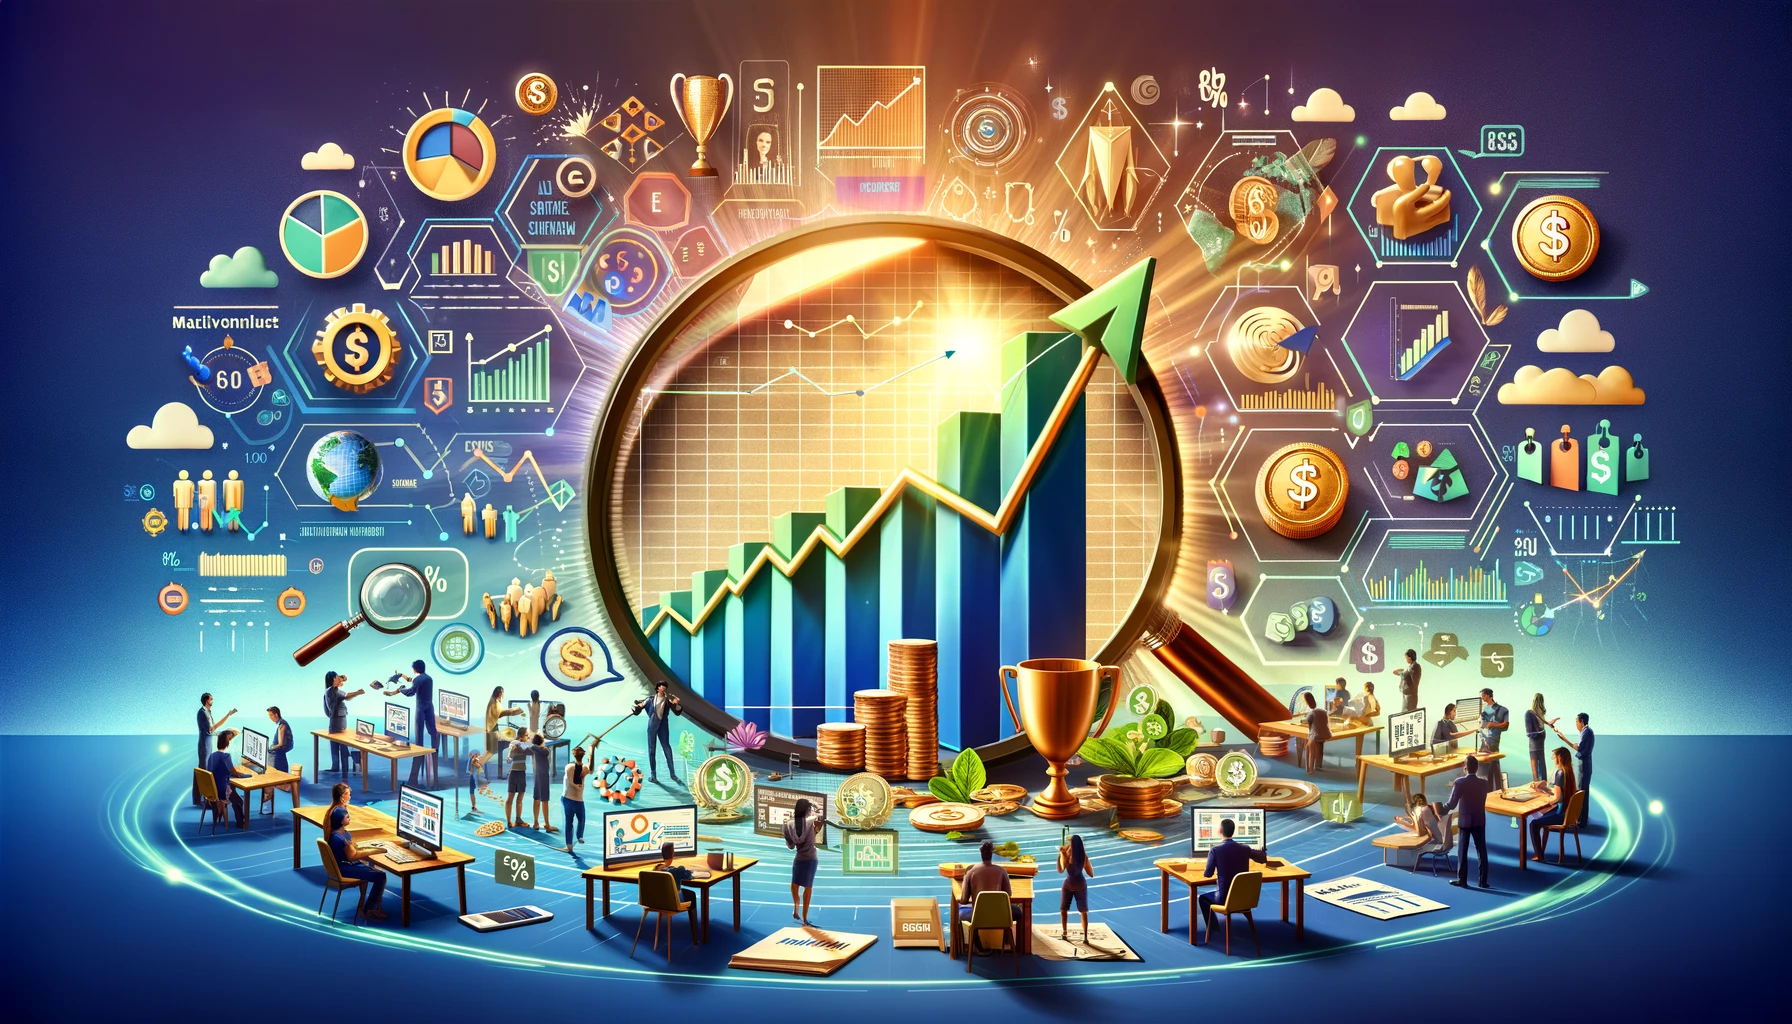 Image encapsulating 'Maximizing Commissions Strategies', with a dynamic graph indicating rising commissions and strategic elements like a magnifying glass, trophy, and financial symbols, alongside affiliate marketers at work.